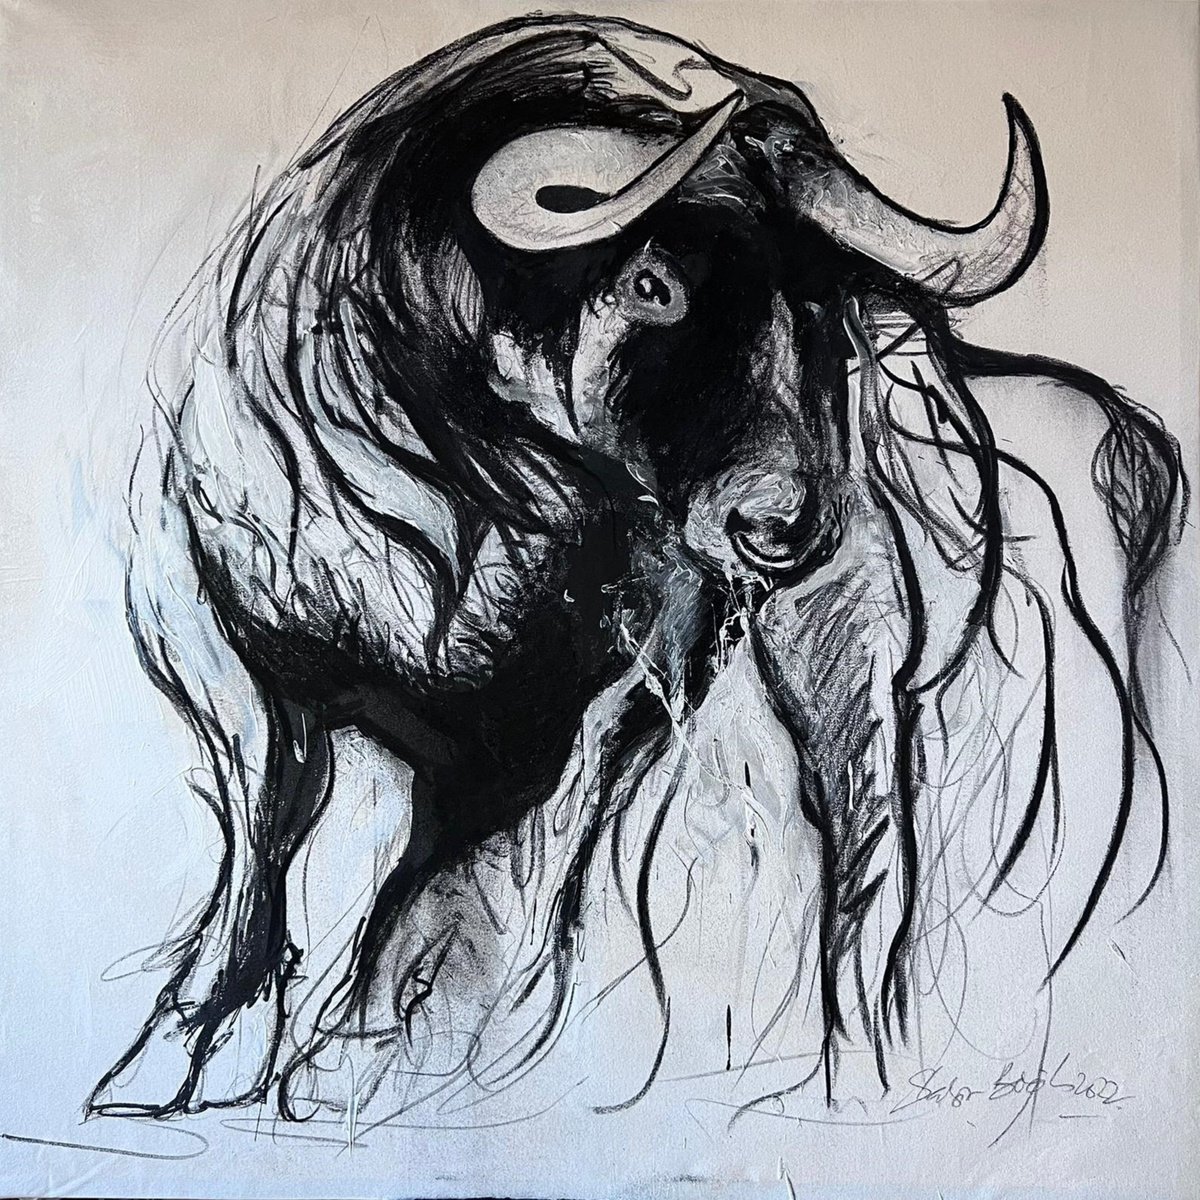 Majestic Bull by Shabs Beigh